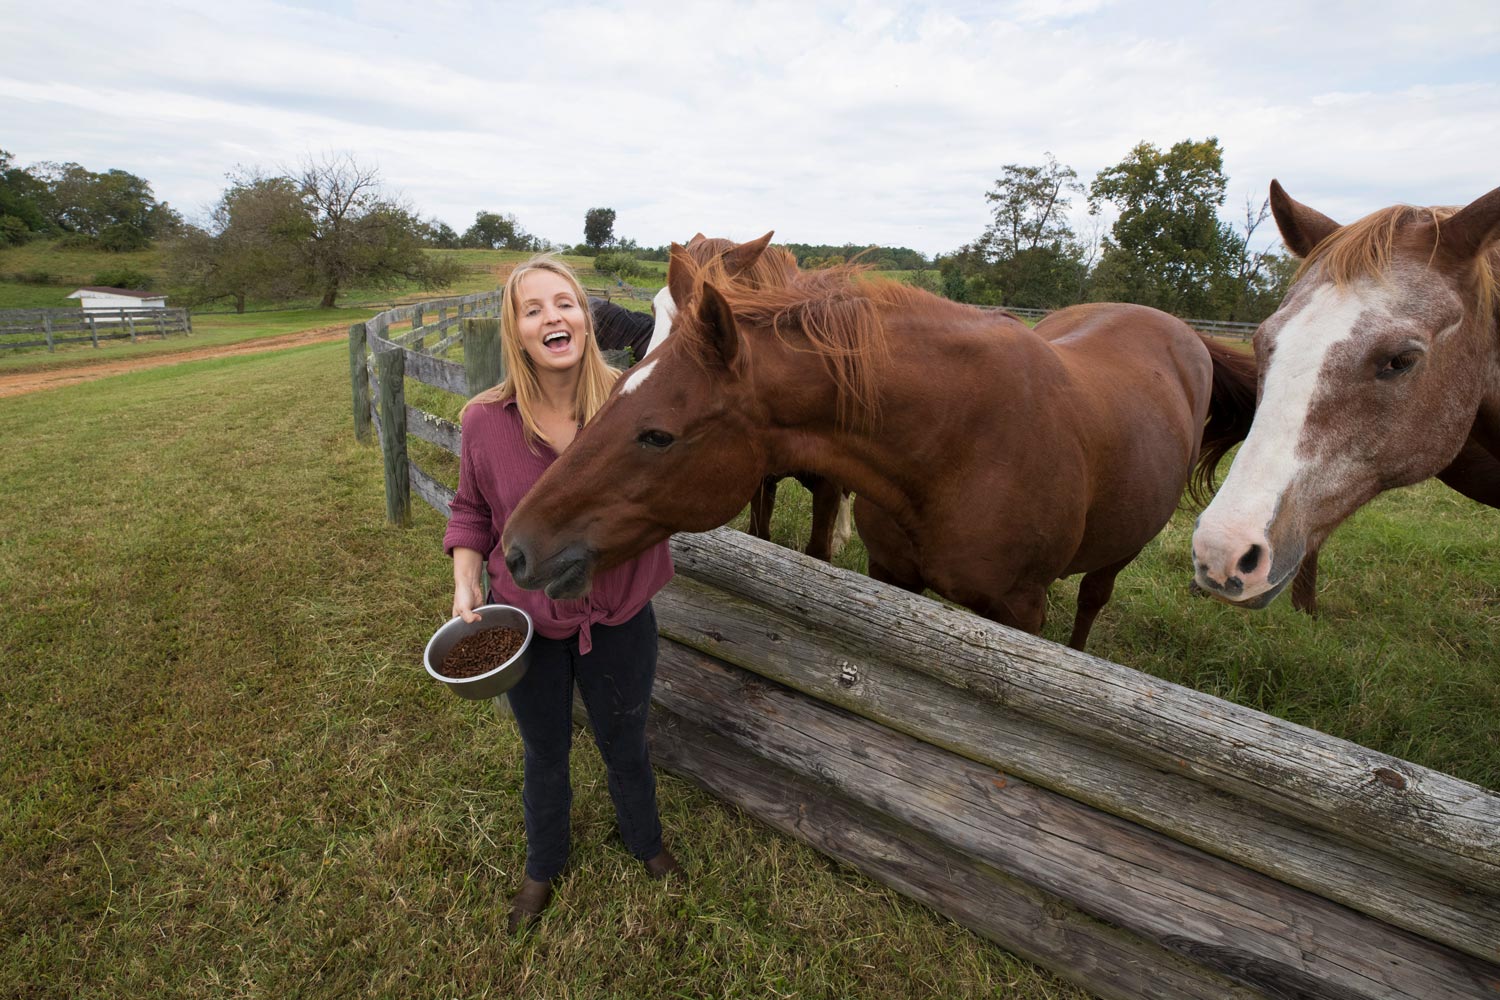 Meg Greenhalgh feeds horses over a wooden fence